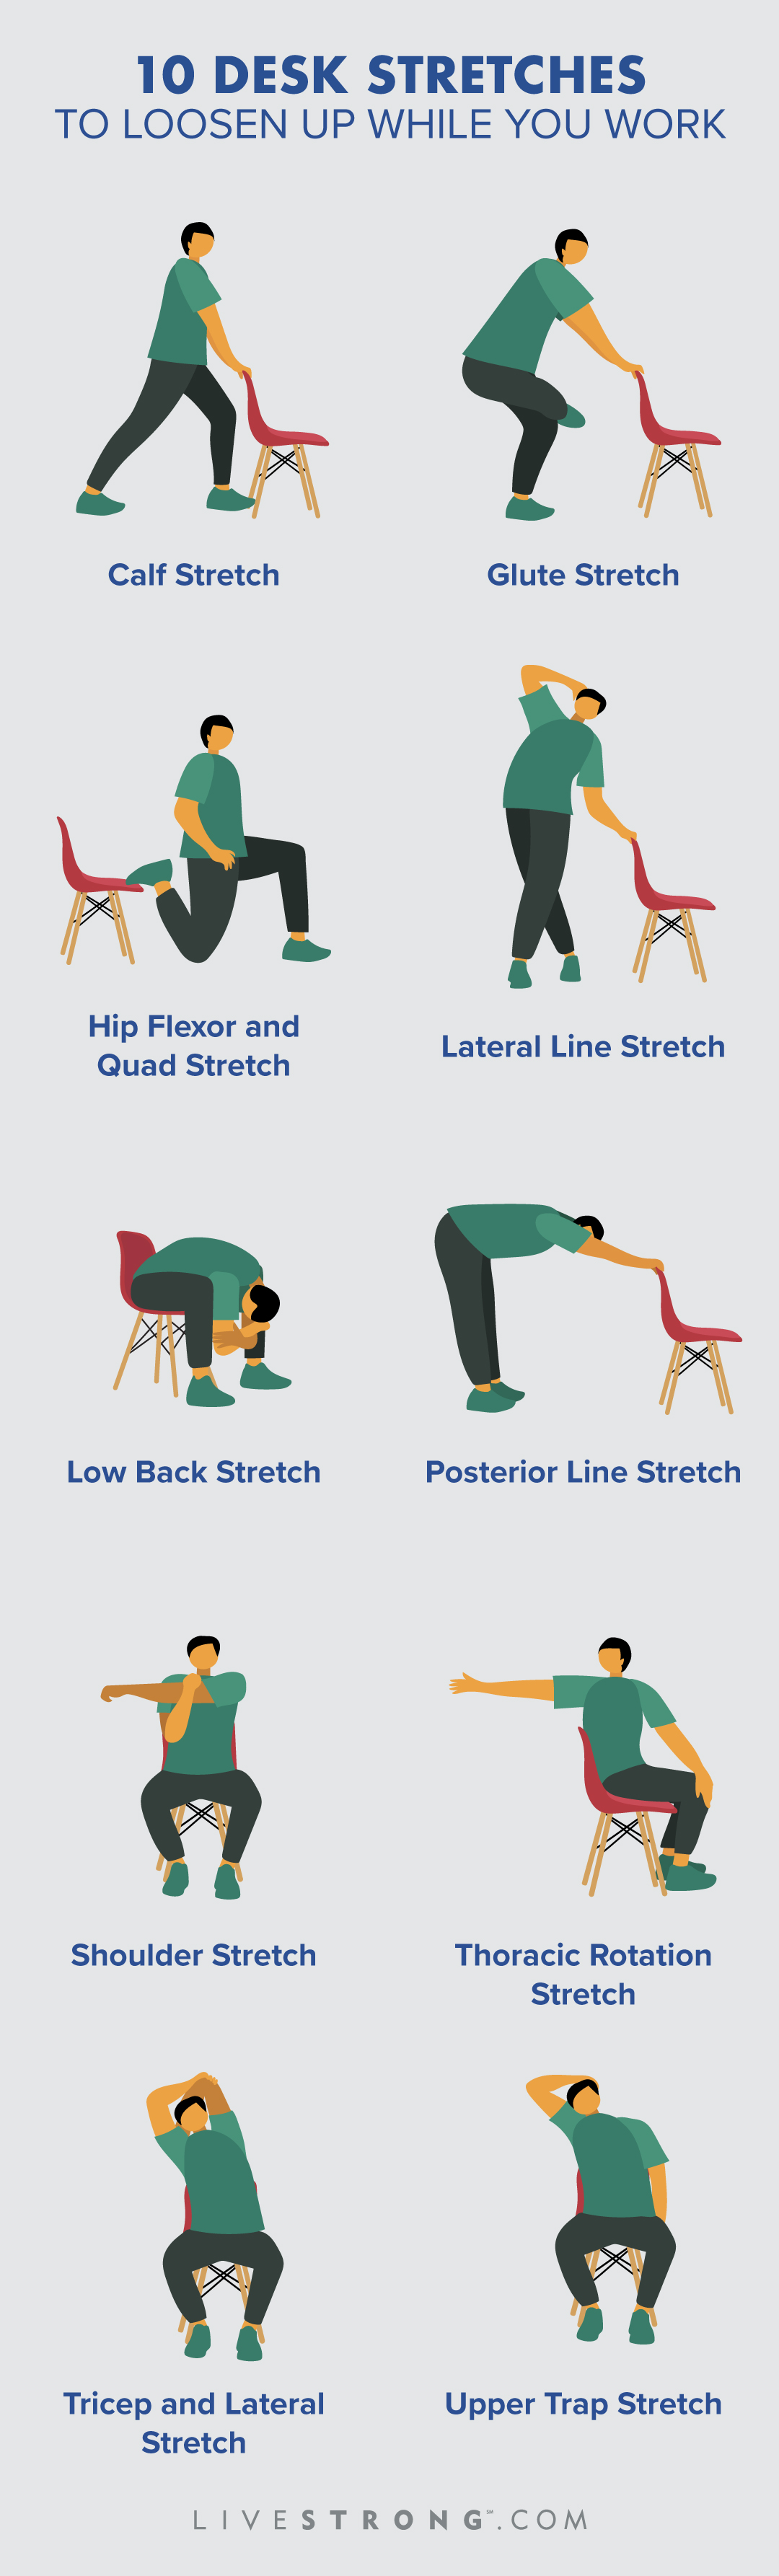 Lower Back Stretches At Desk